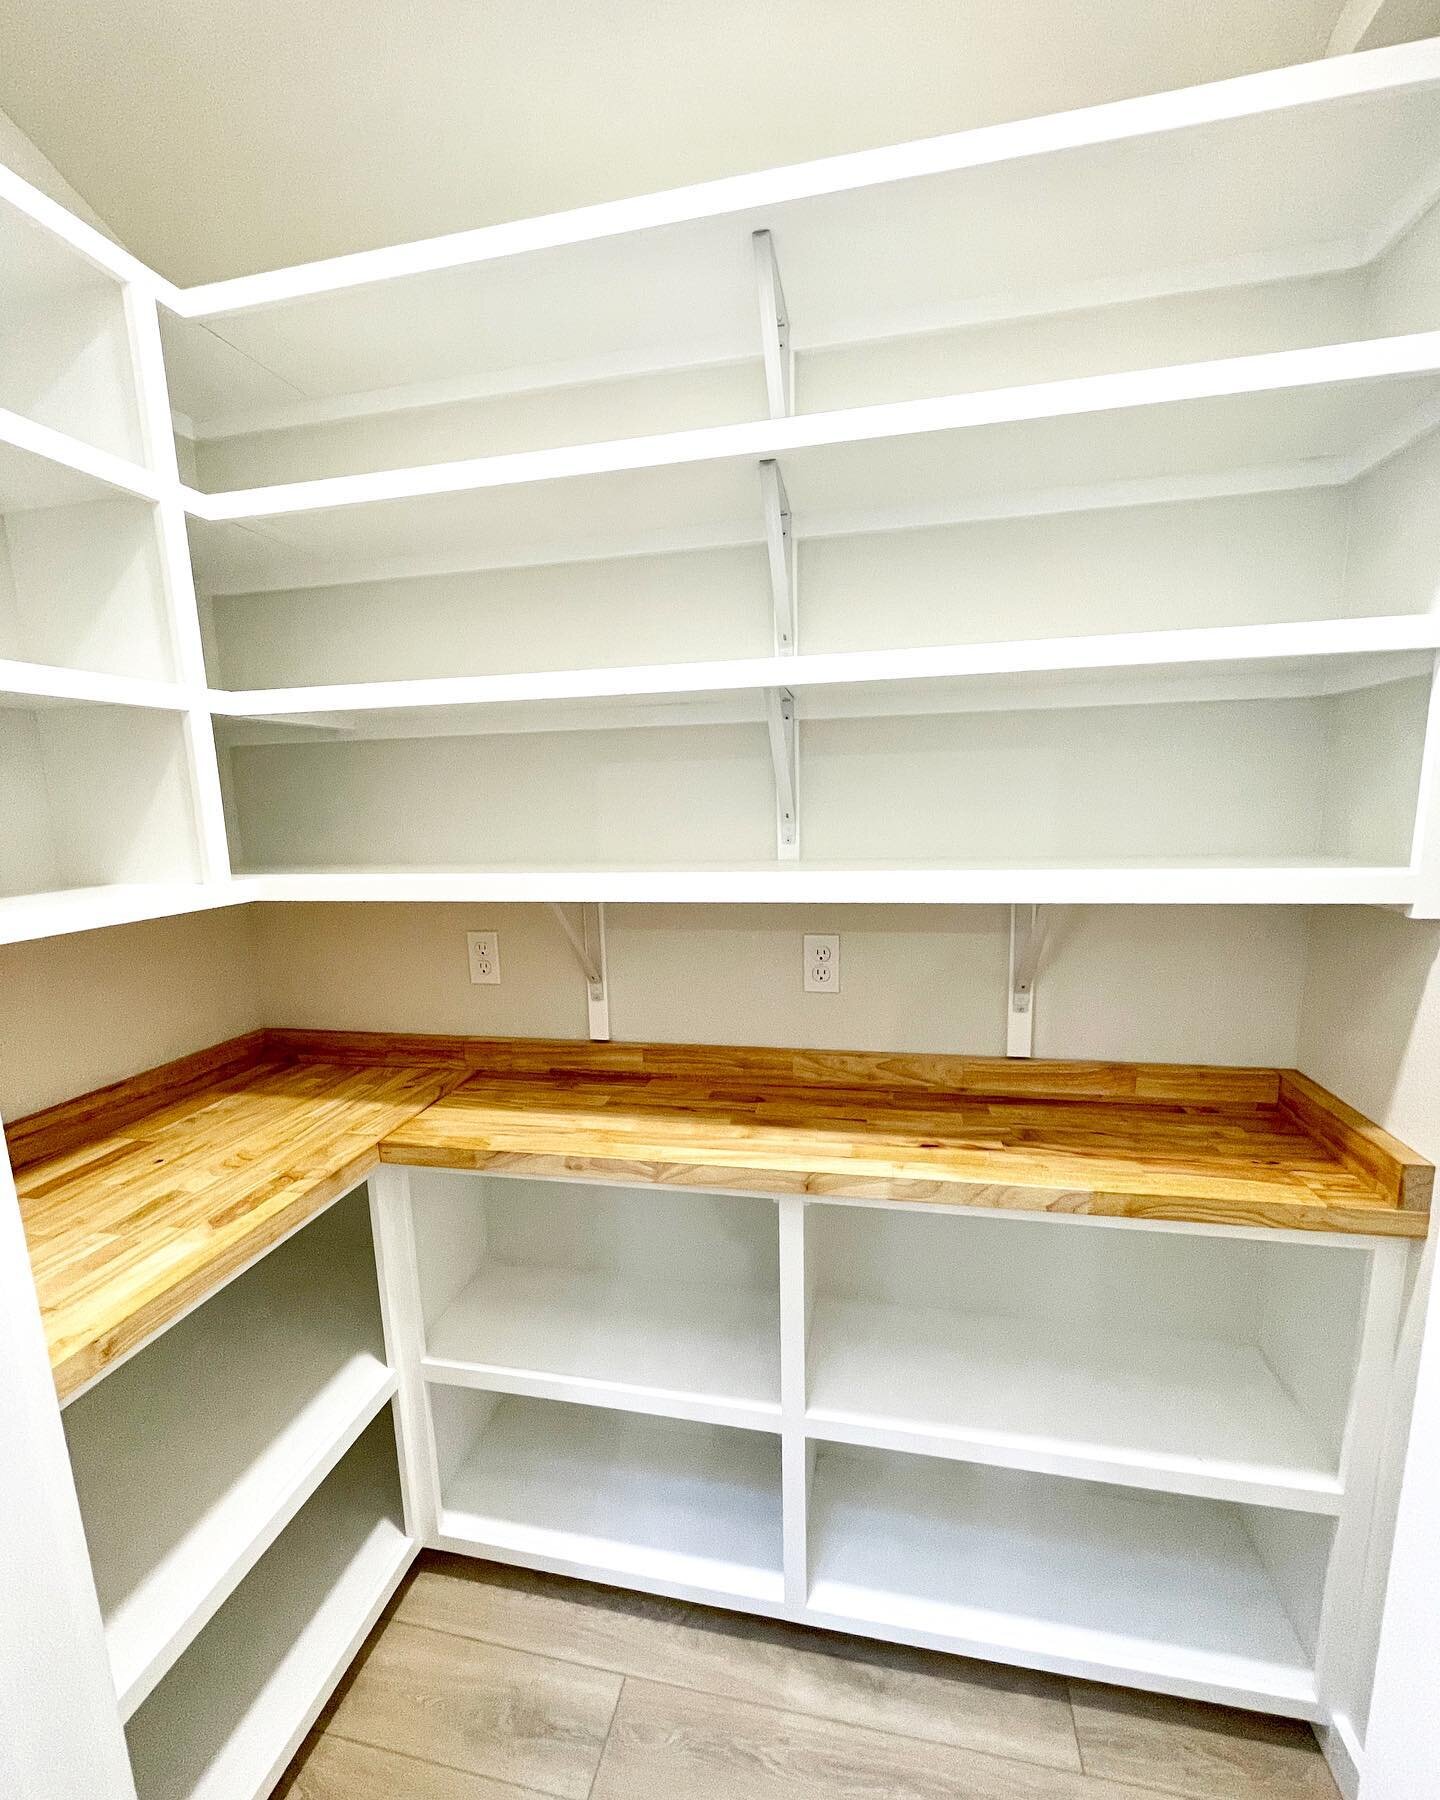 New walk-in pantry with a countertop to store and use your small appliances and storage for days 🔥 

#walkinpantry #websterconstruction #idahoremodel #boise #pantry #thisisboise #storage